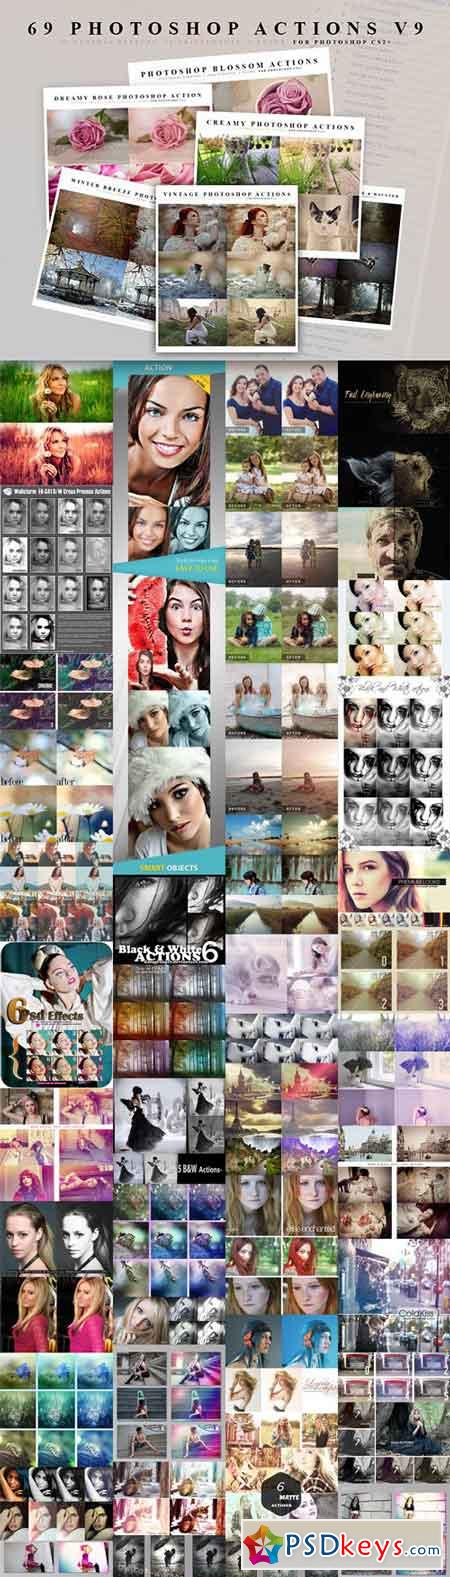 50+ Favorite Photoshop Actions for Photo Effects